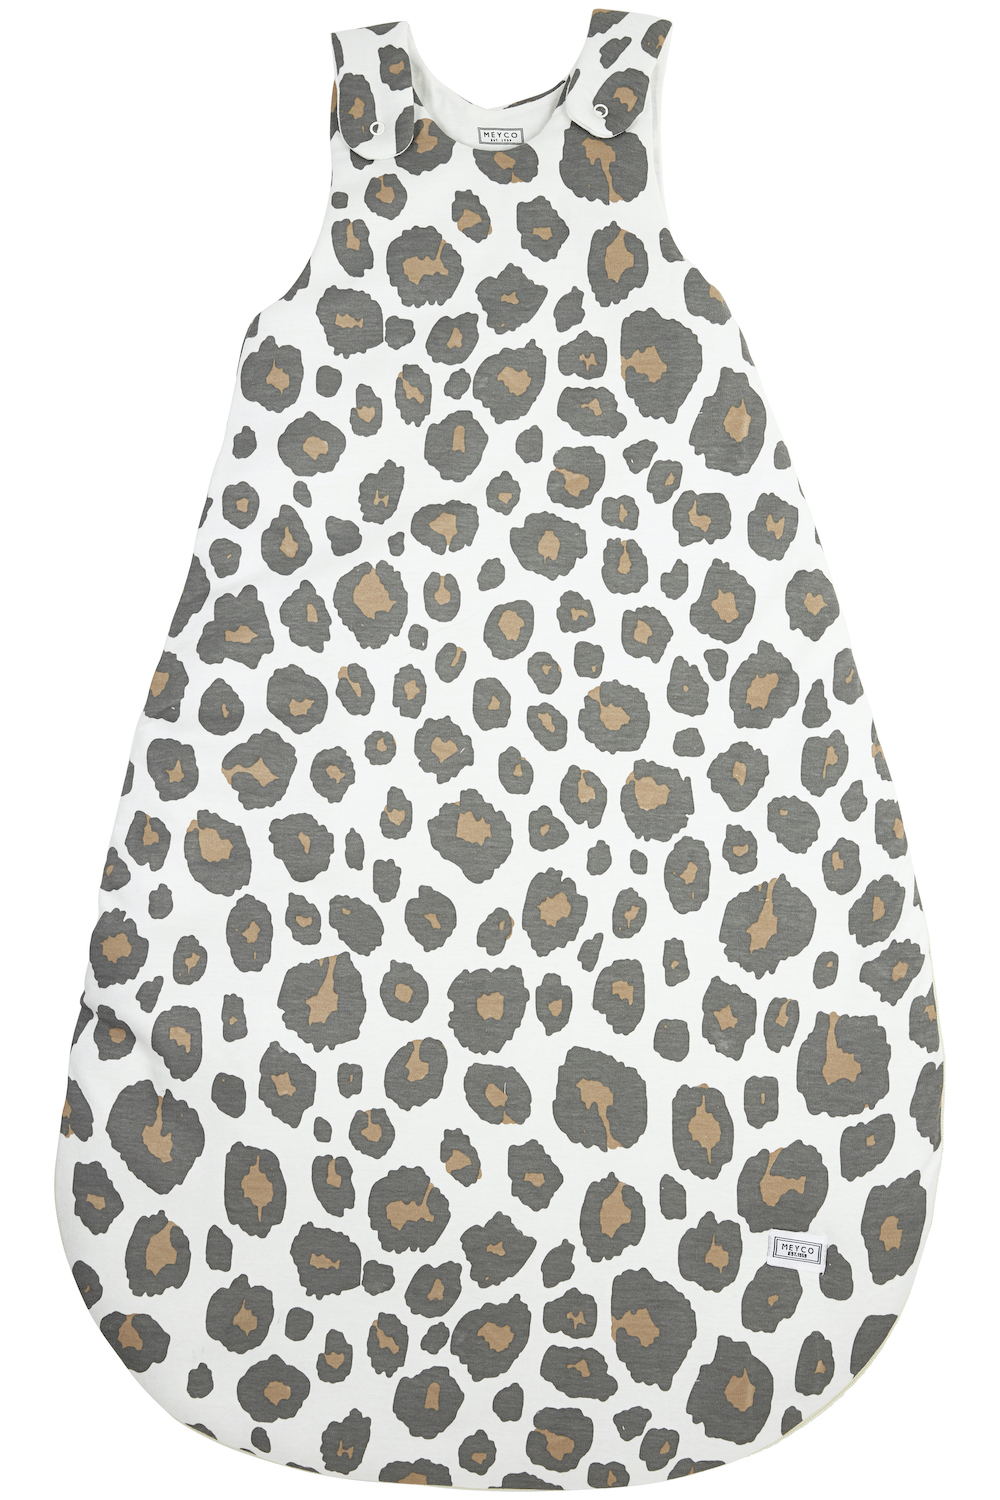 Sleepingbag round 2-parts Panther - neutral - 68/74